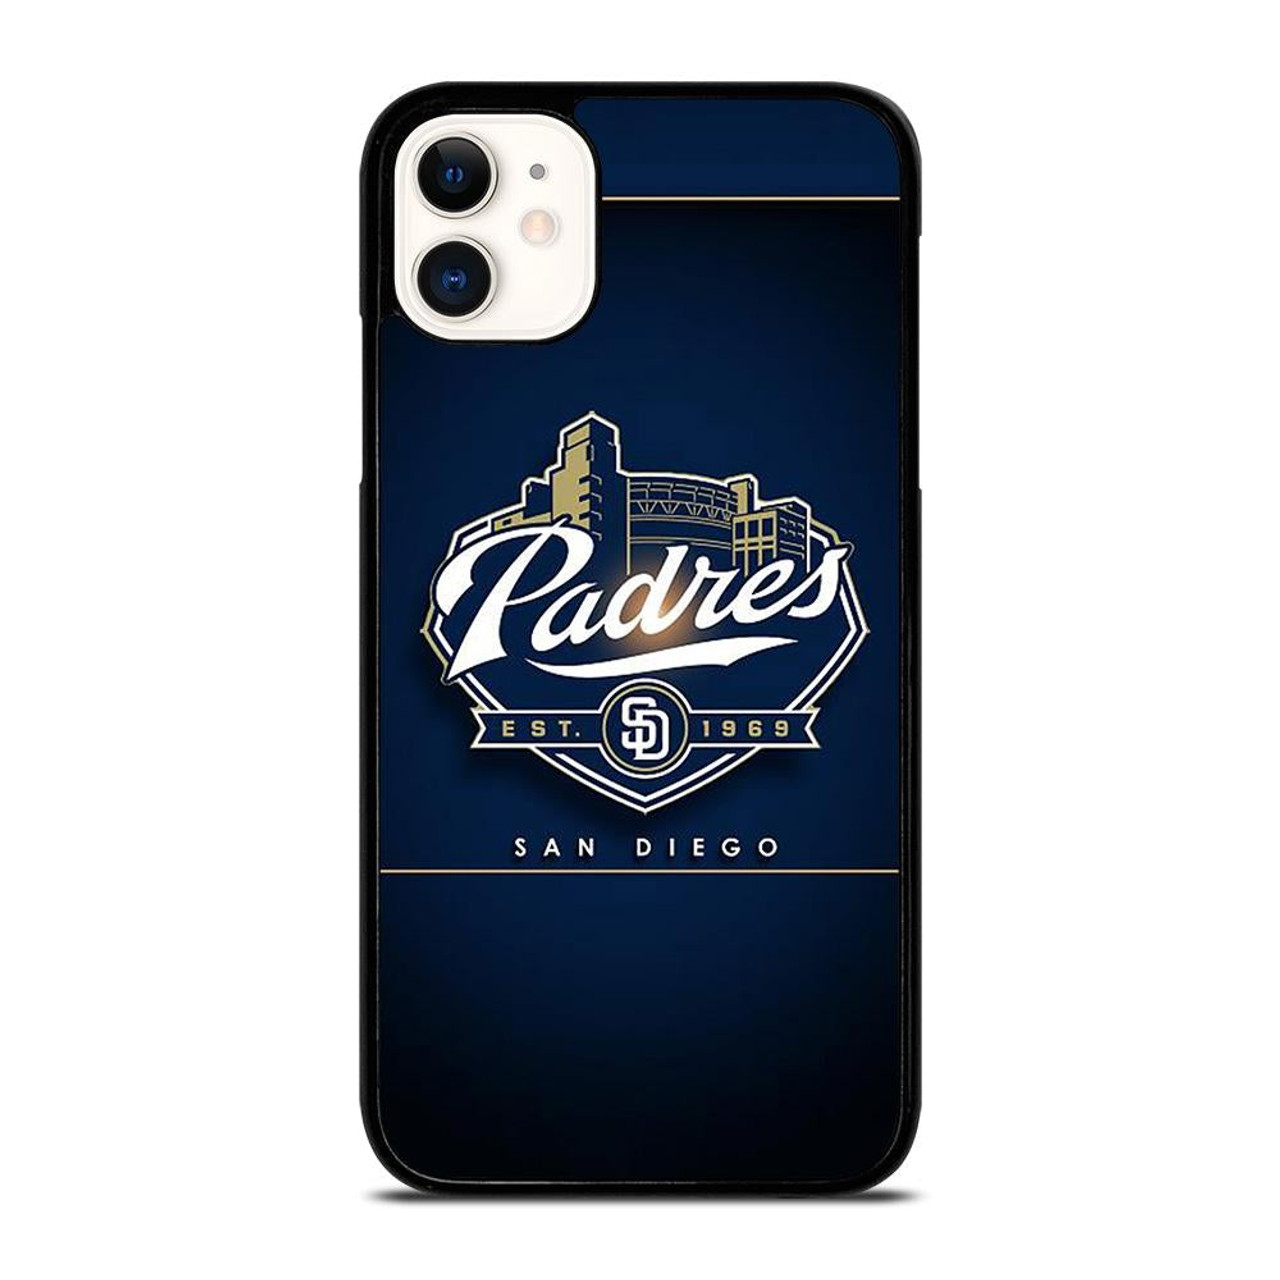 SAN DIEGO PADRES MLB iPhone 11 Case Cover